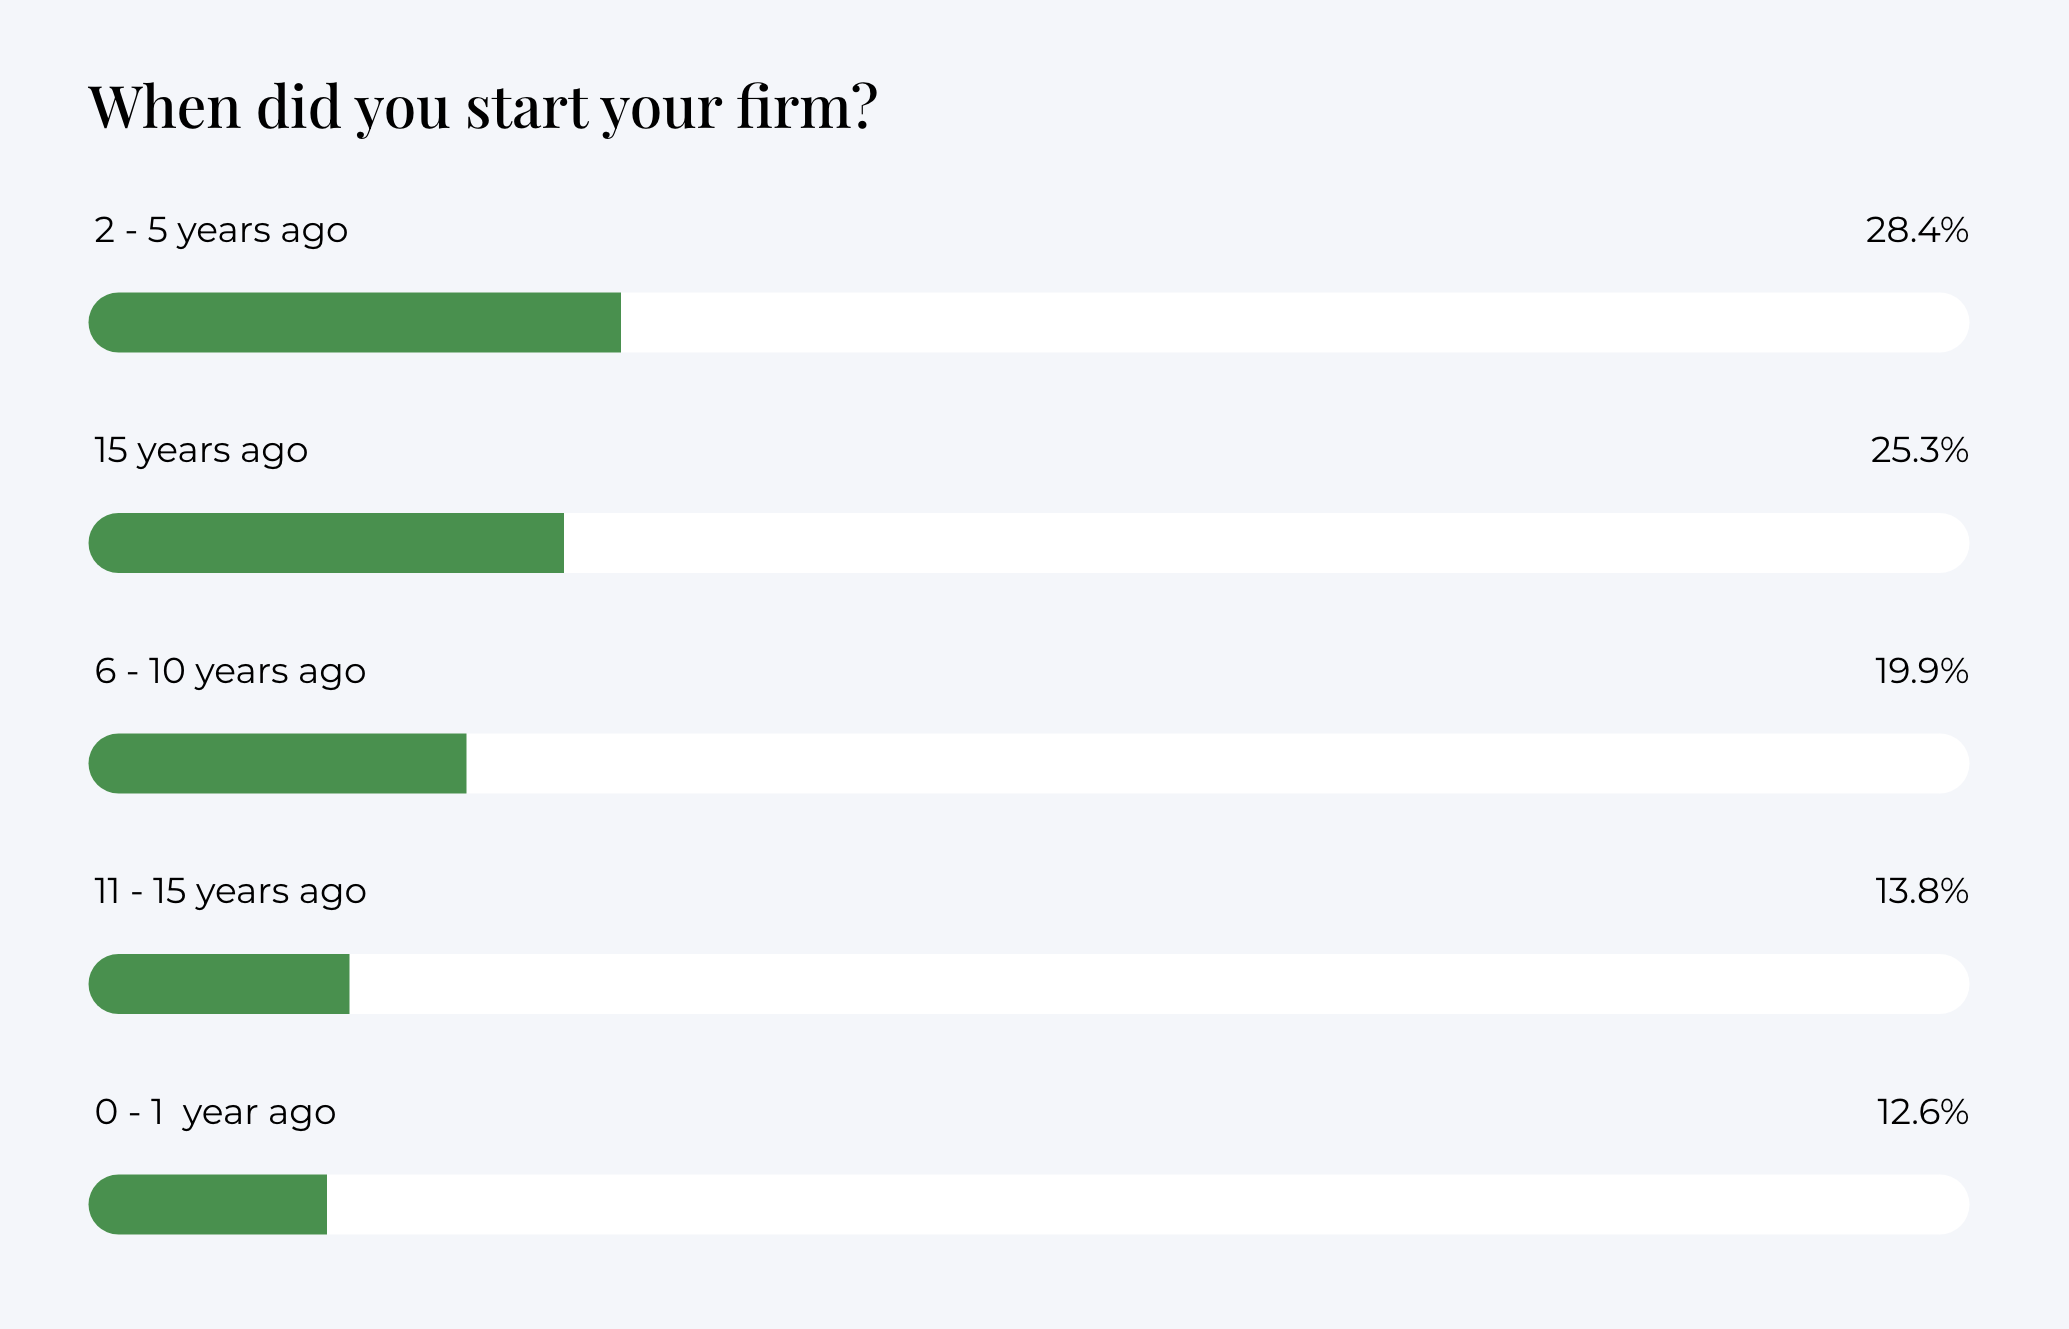 accounting firms revenue report 2023 - when did you start you firm